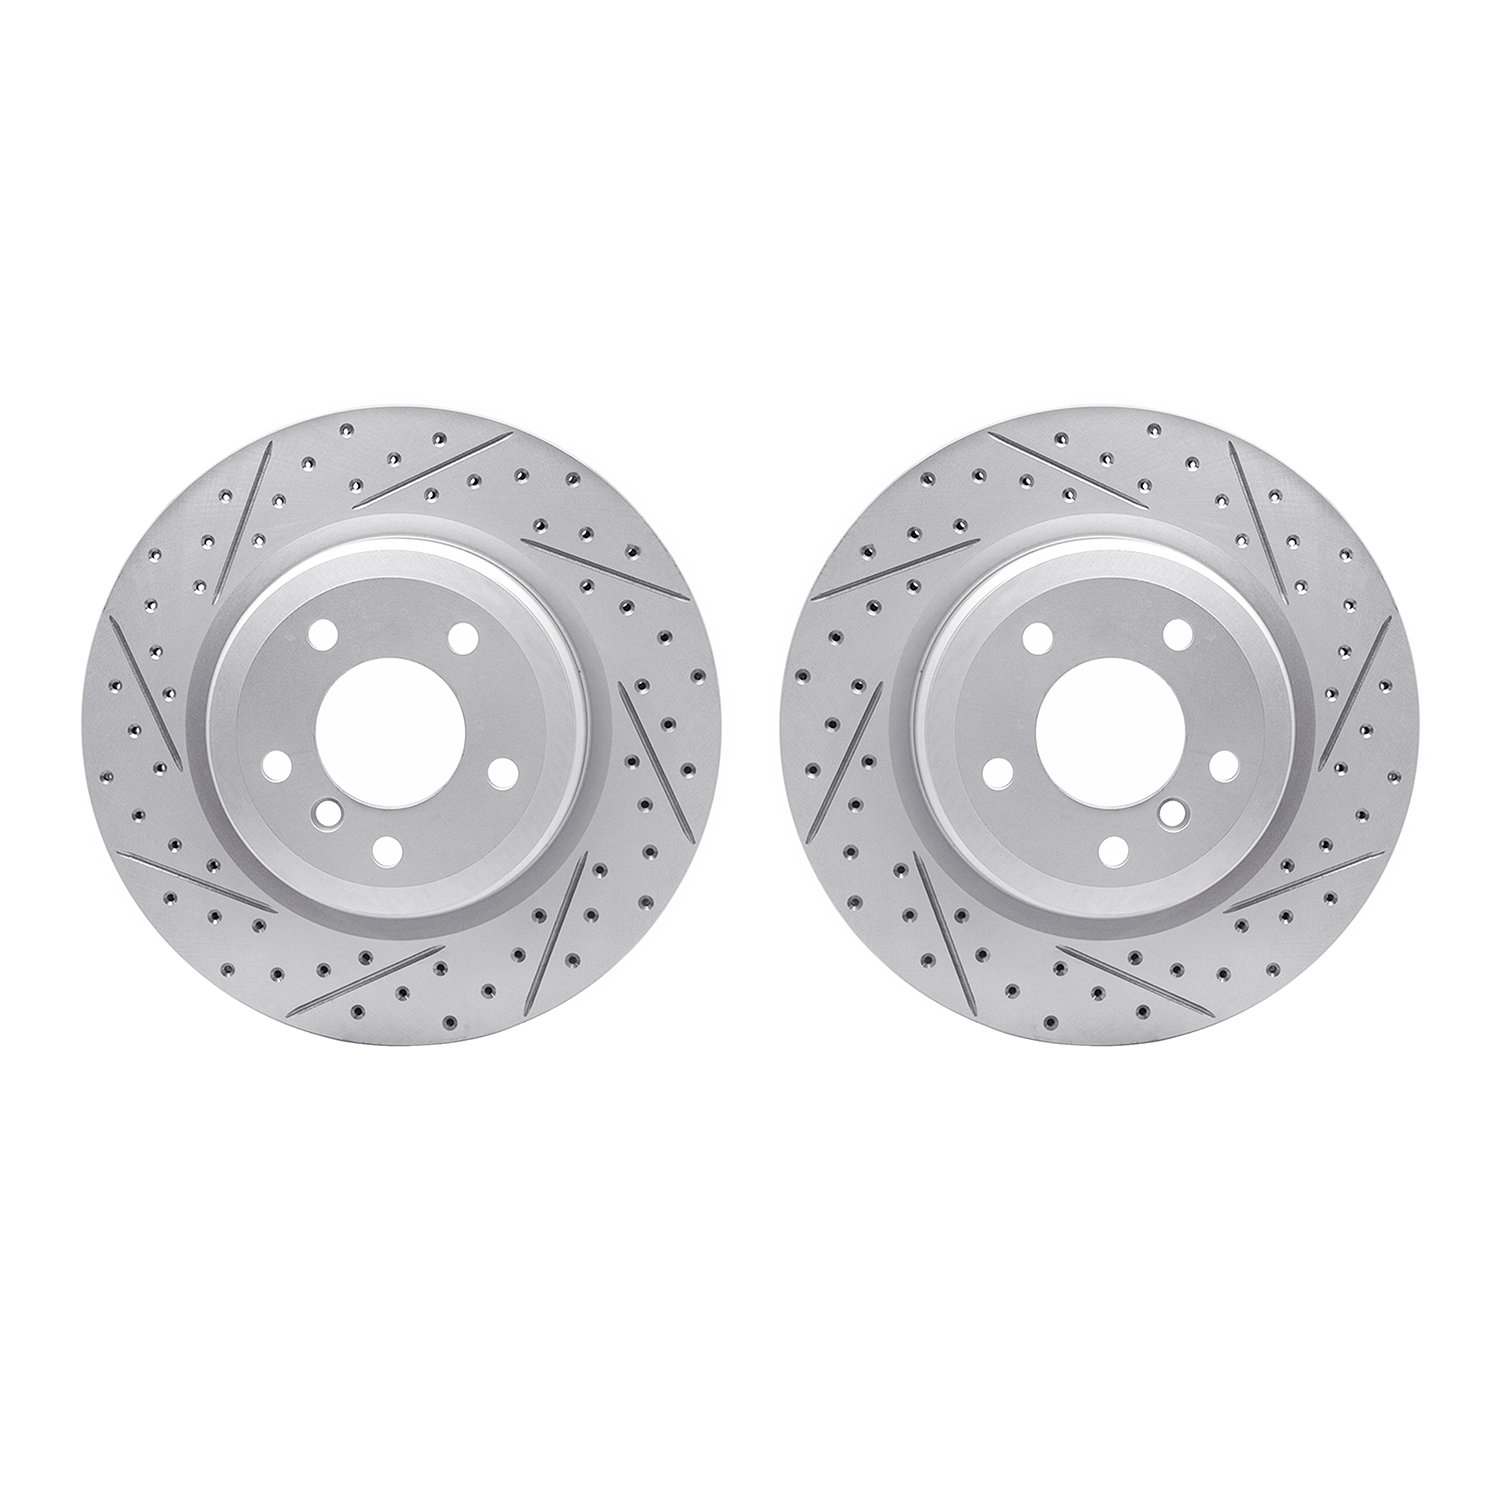 2002-31065 Geoperformance Drilled/Slotted Brake Rotors, 2006-2015 BMW, Position: Rear